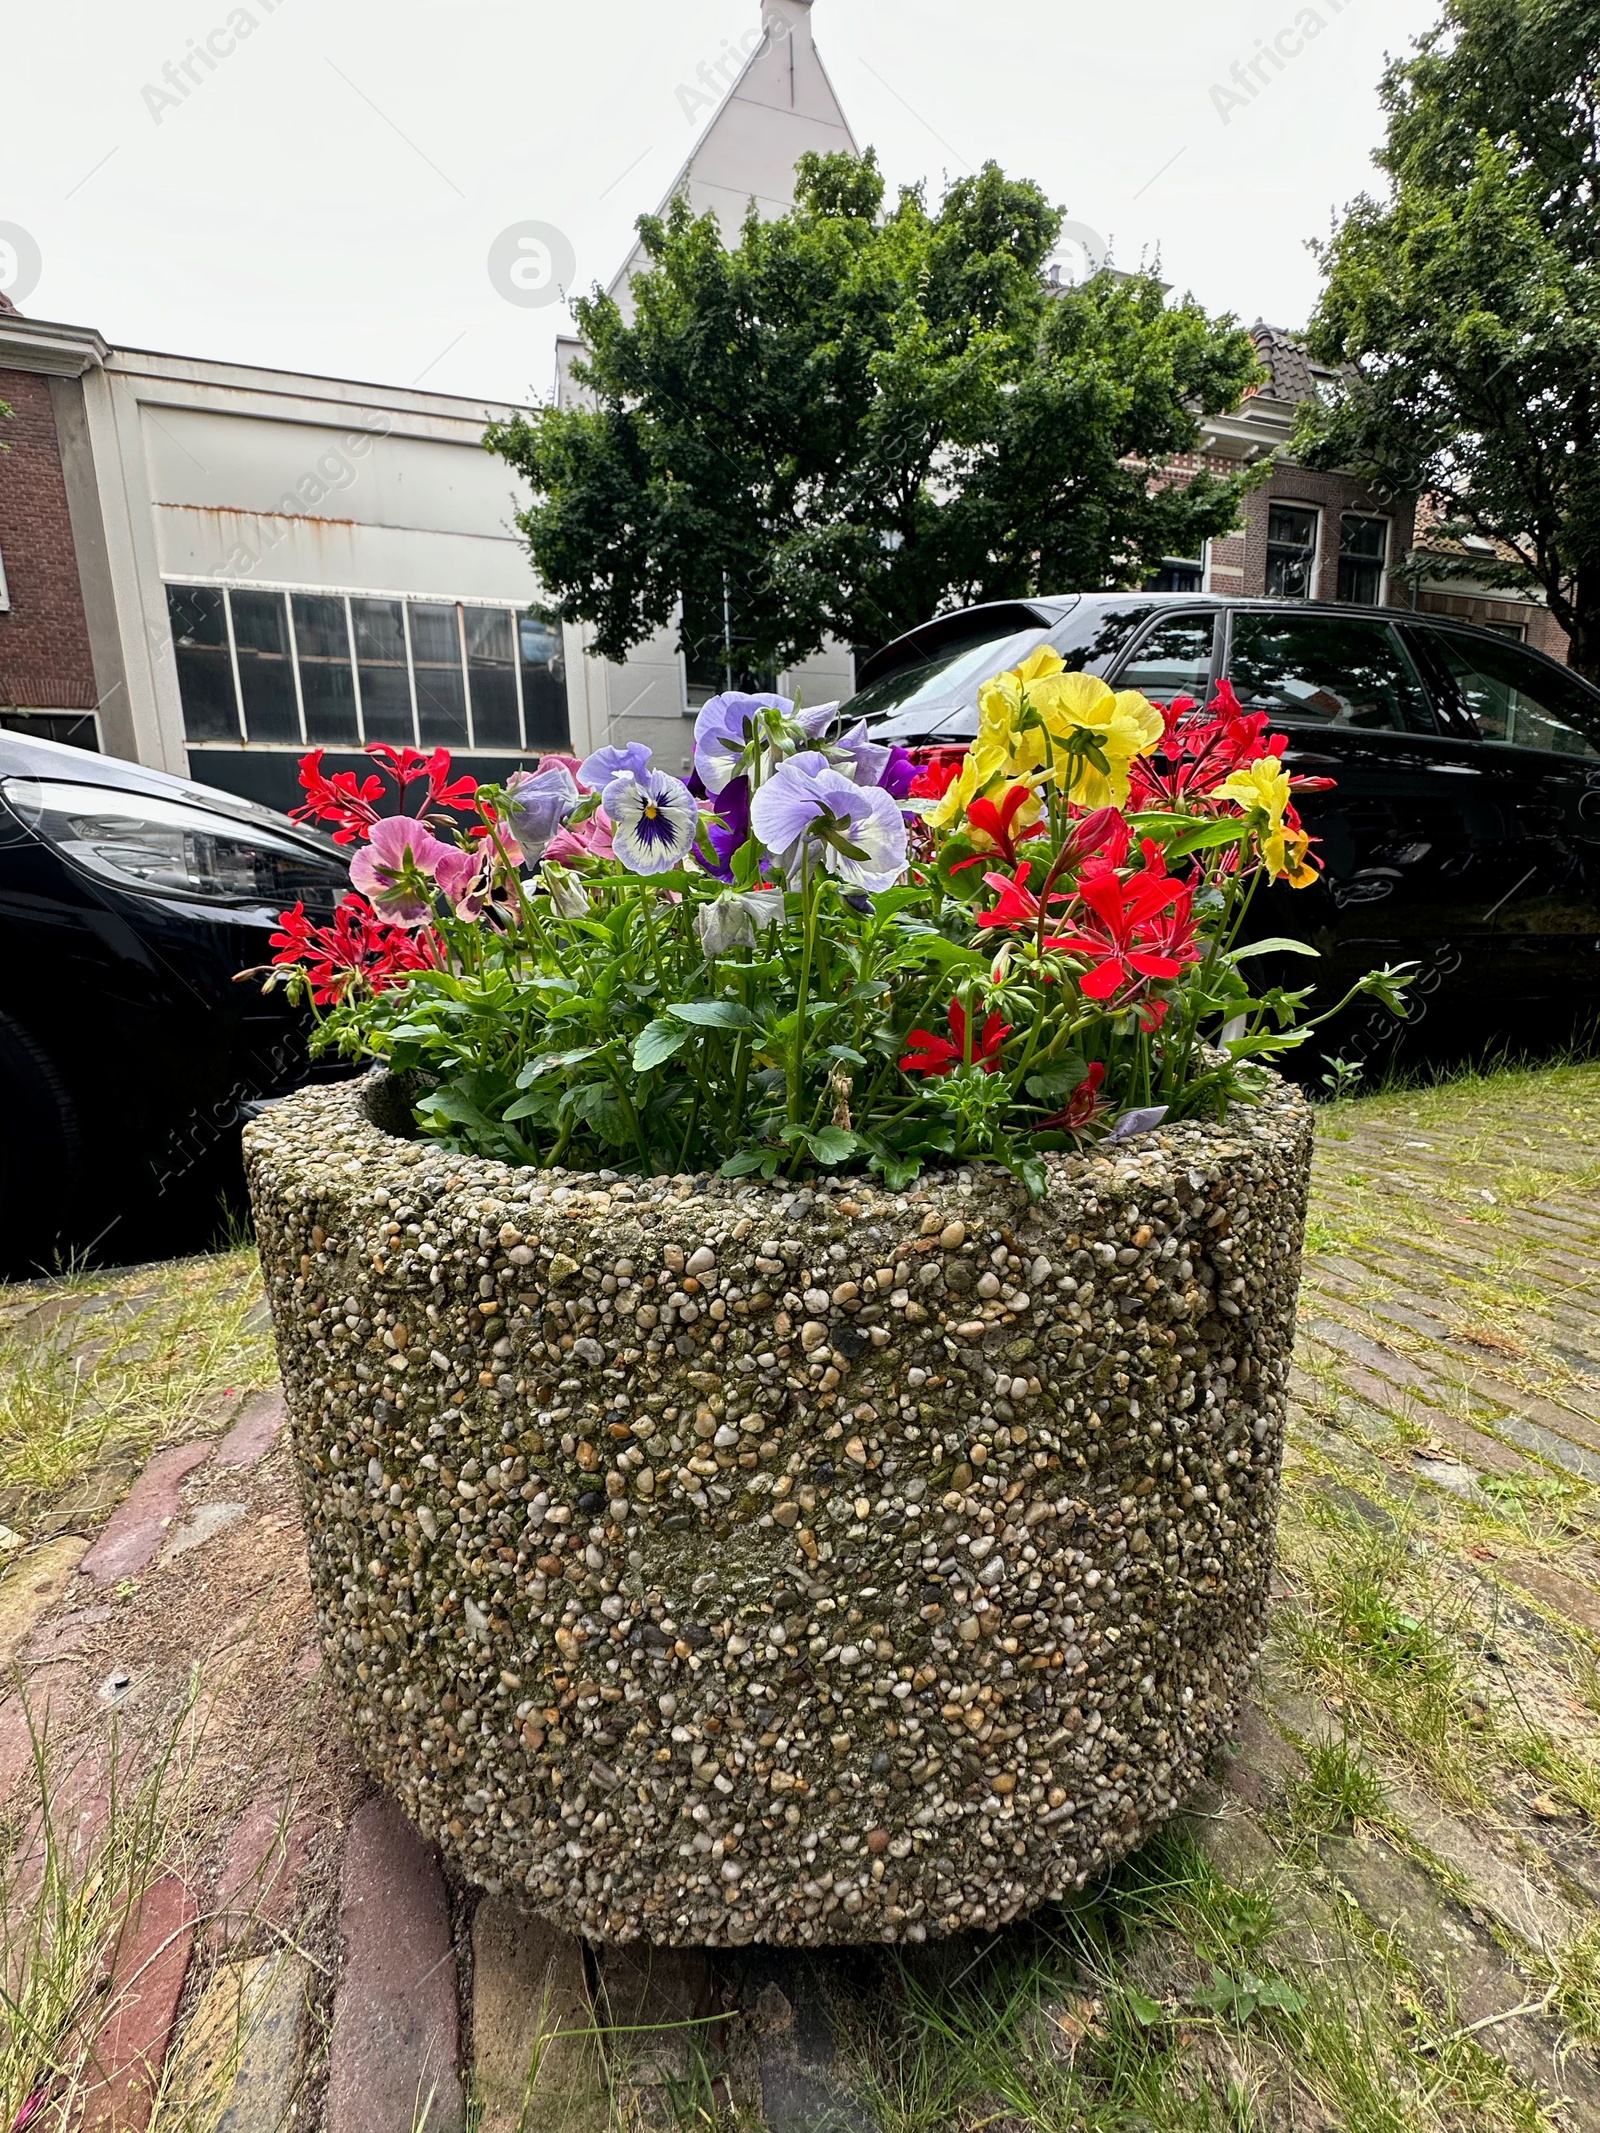 Photo of Beautiful colorful flowers in pot near road with parked cars